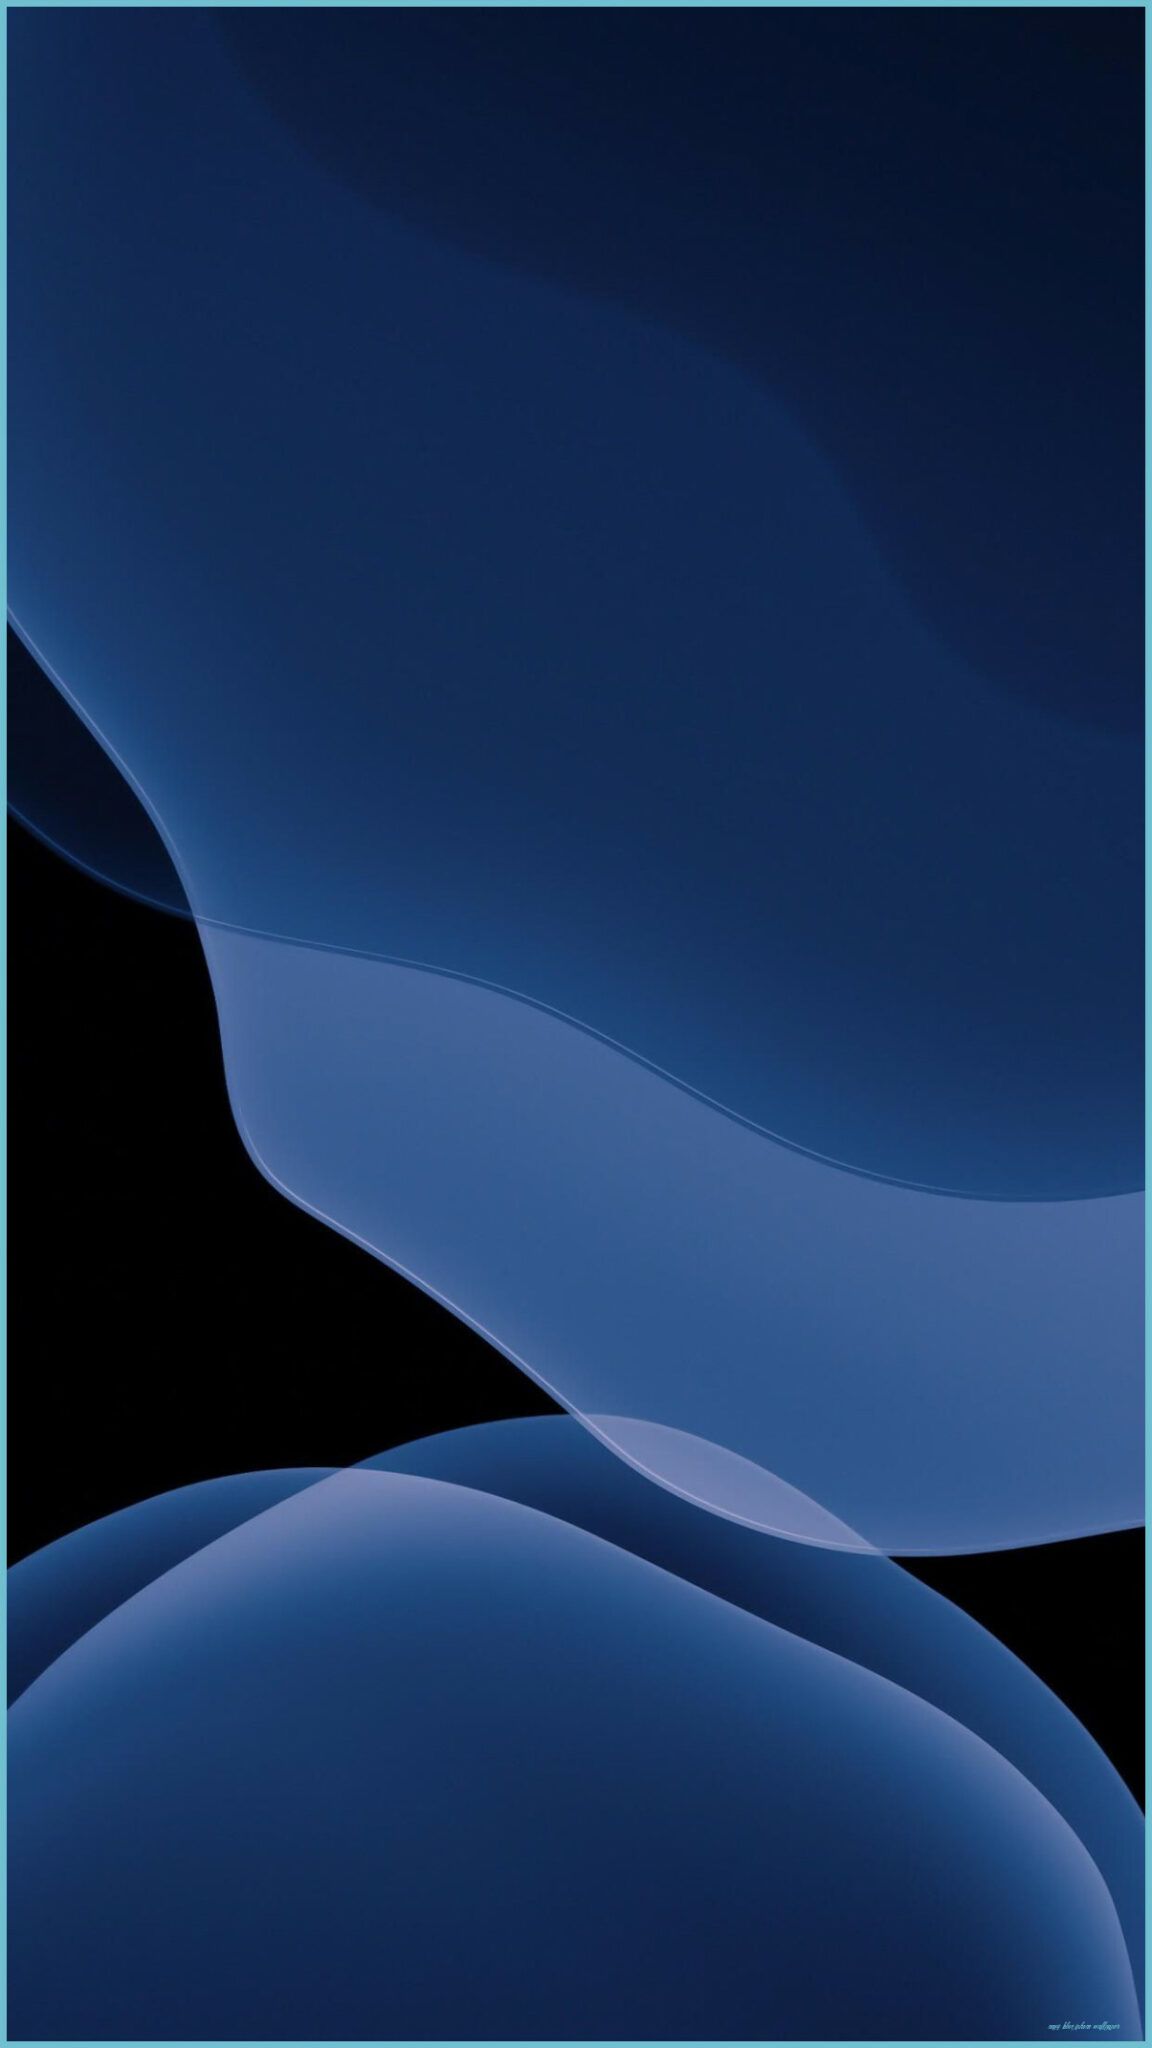 IOS 10 Stock Midnight Blue (Dark) For All iPhone Wallpaper Blue iPhone Wallpaper